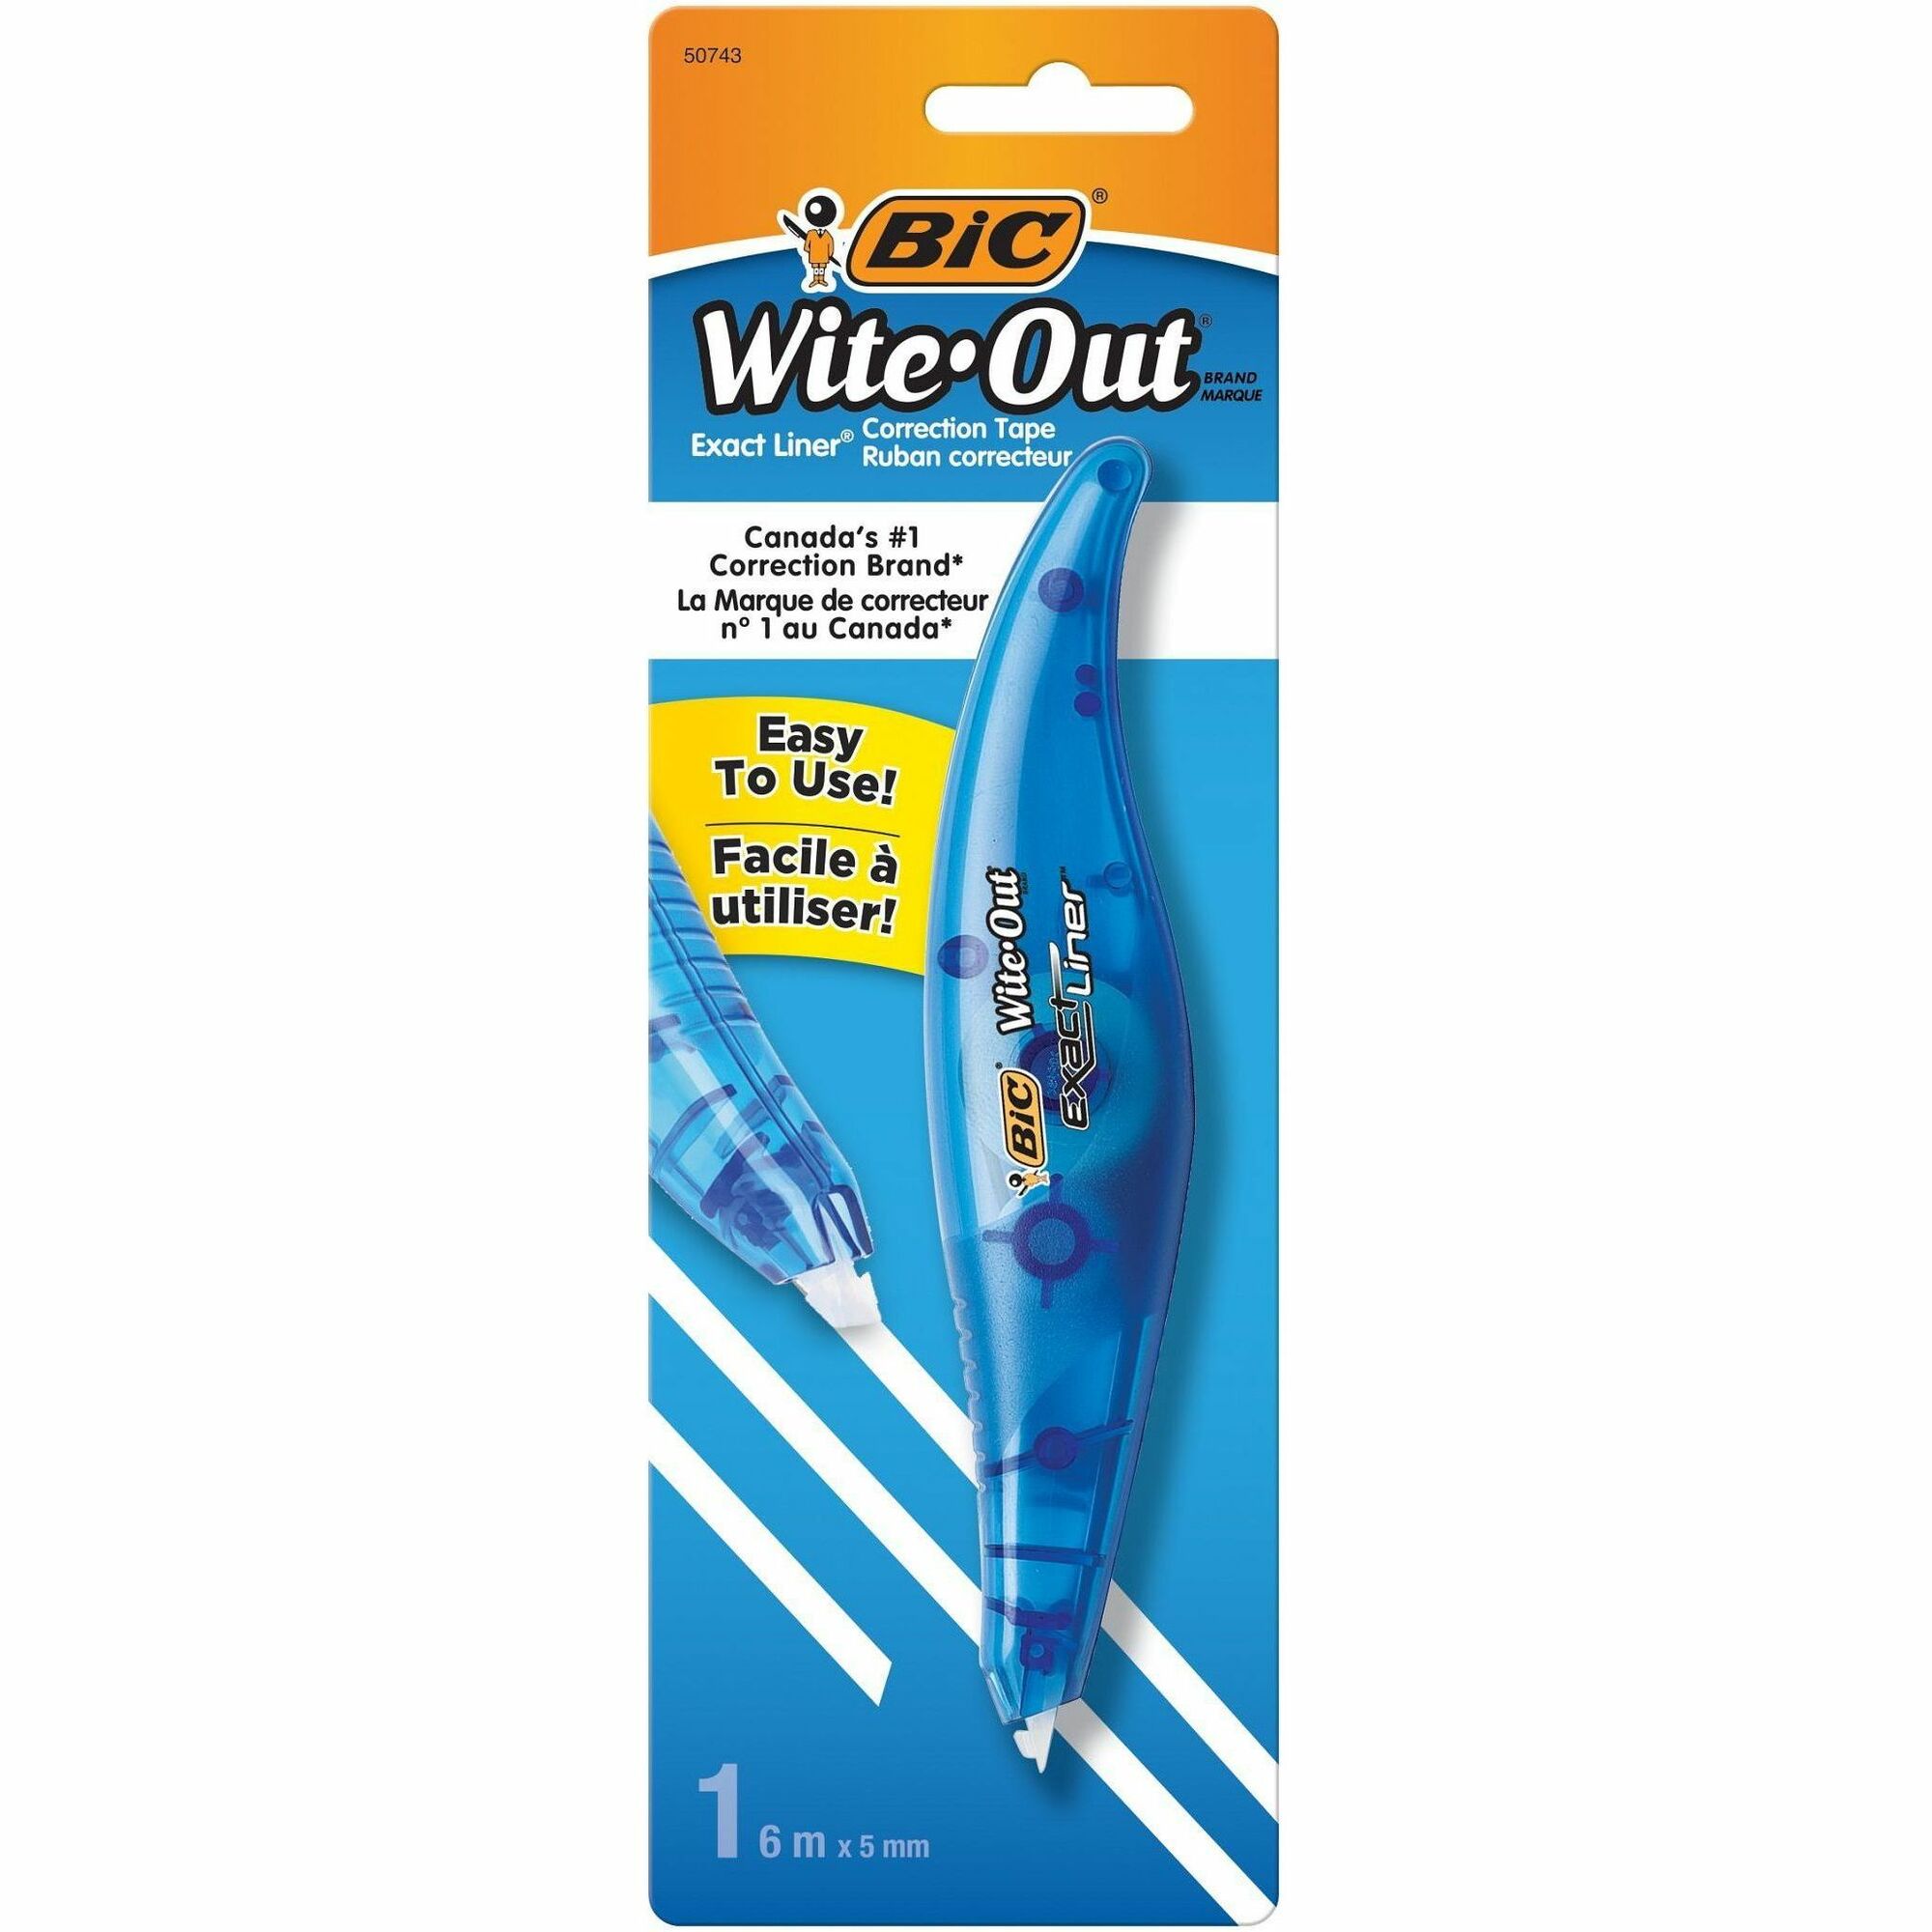 BIC Wite-Out Exact Liner Correction Tape Pen - Madill - The Office Company